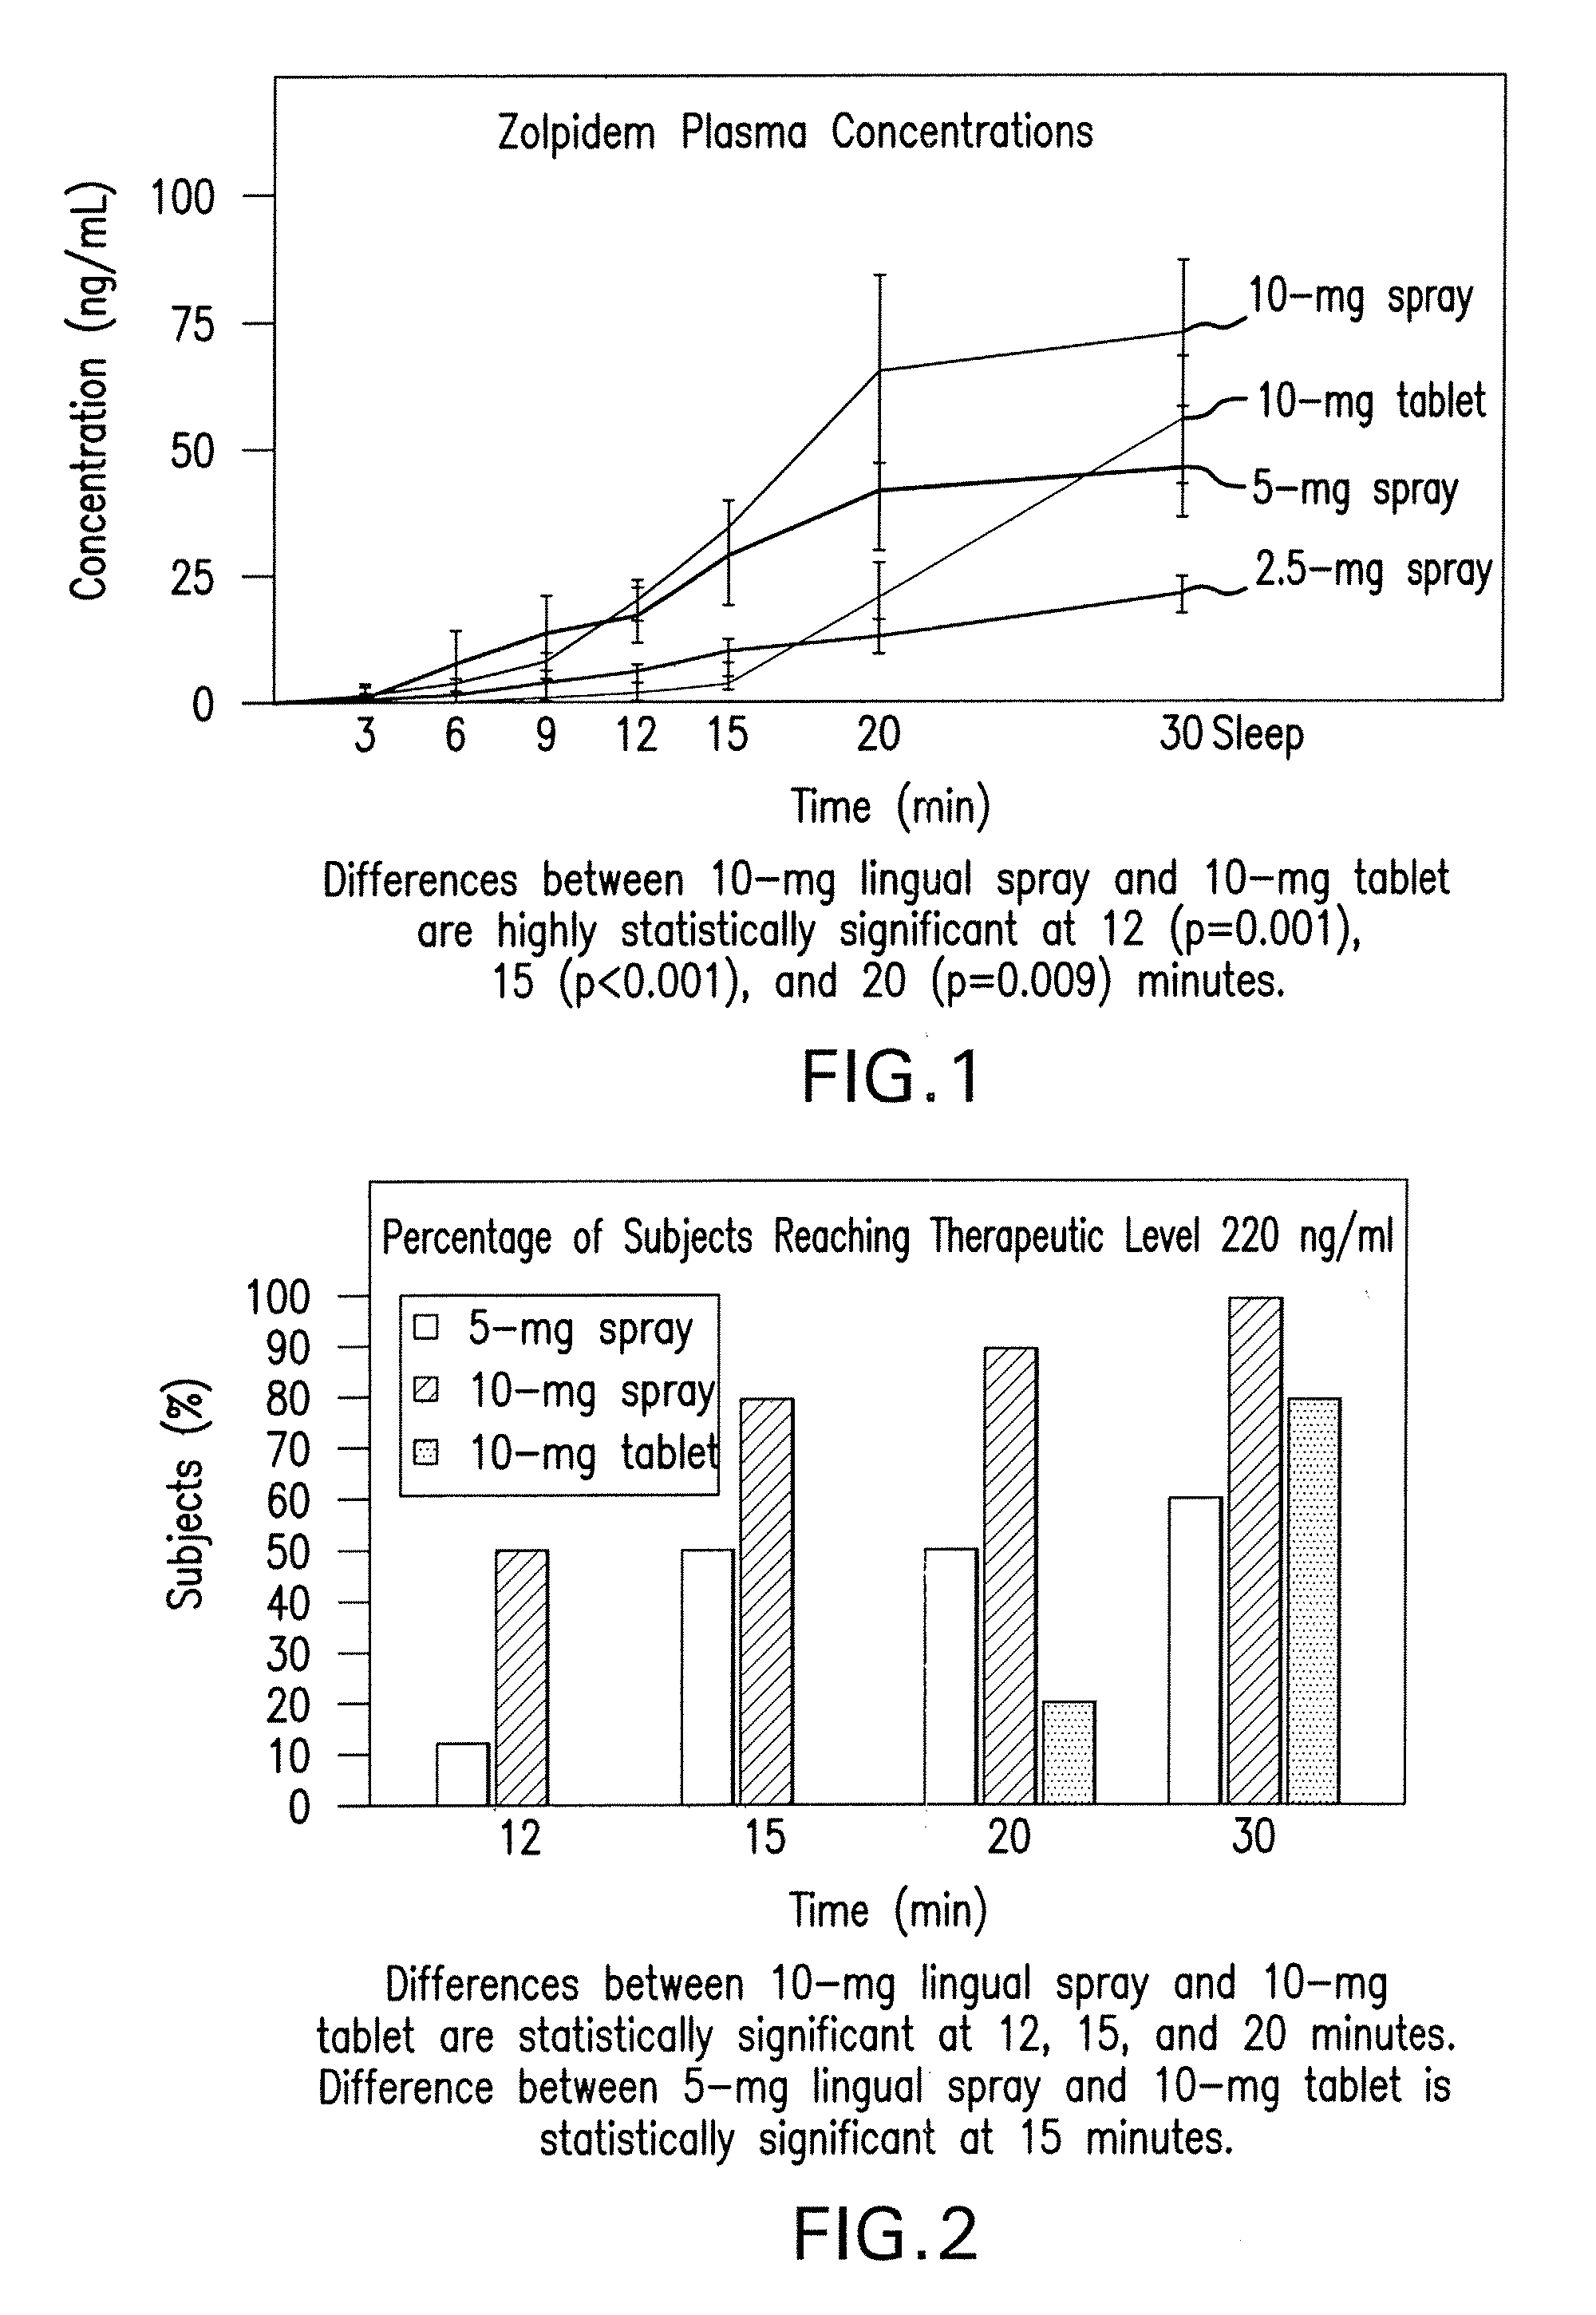 Anti-insomnia compositions and methods